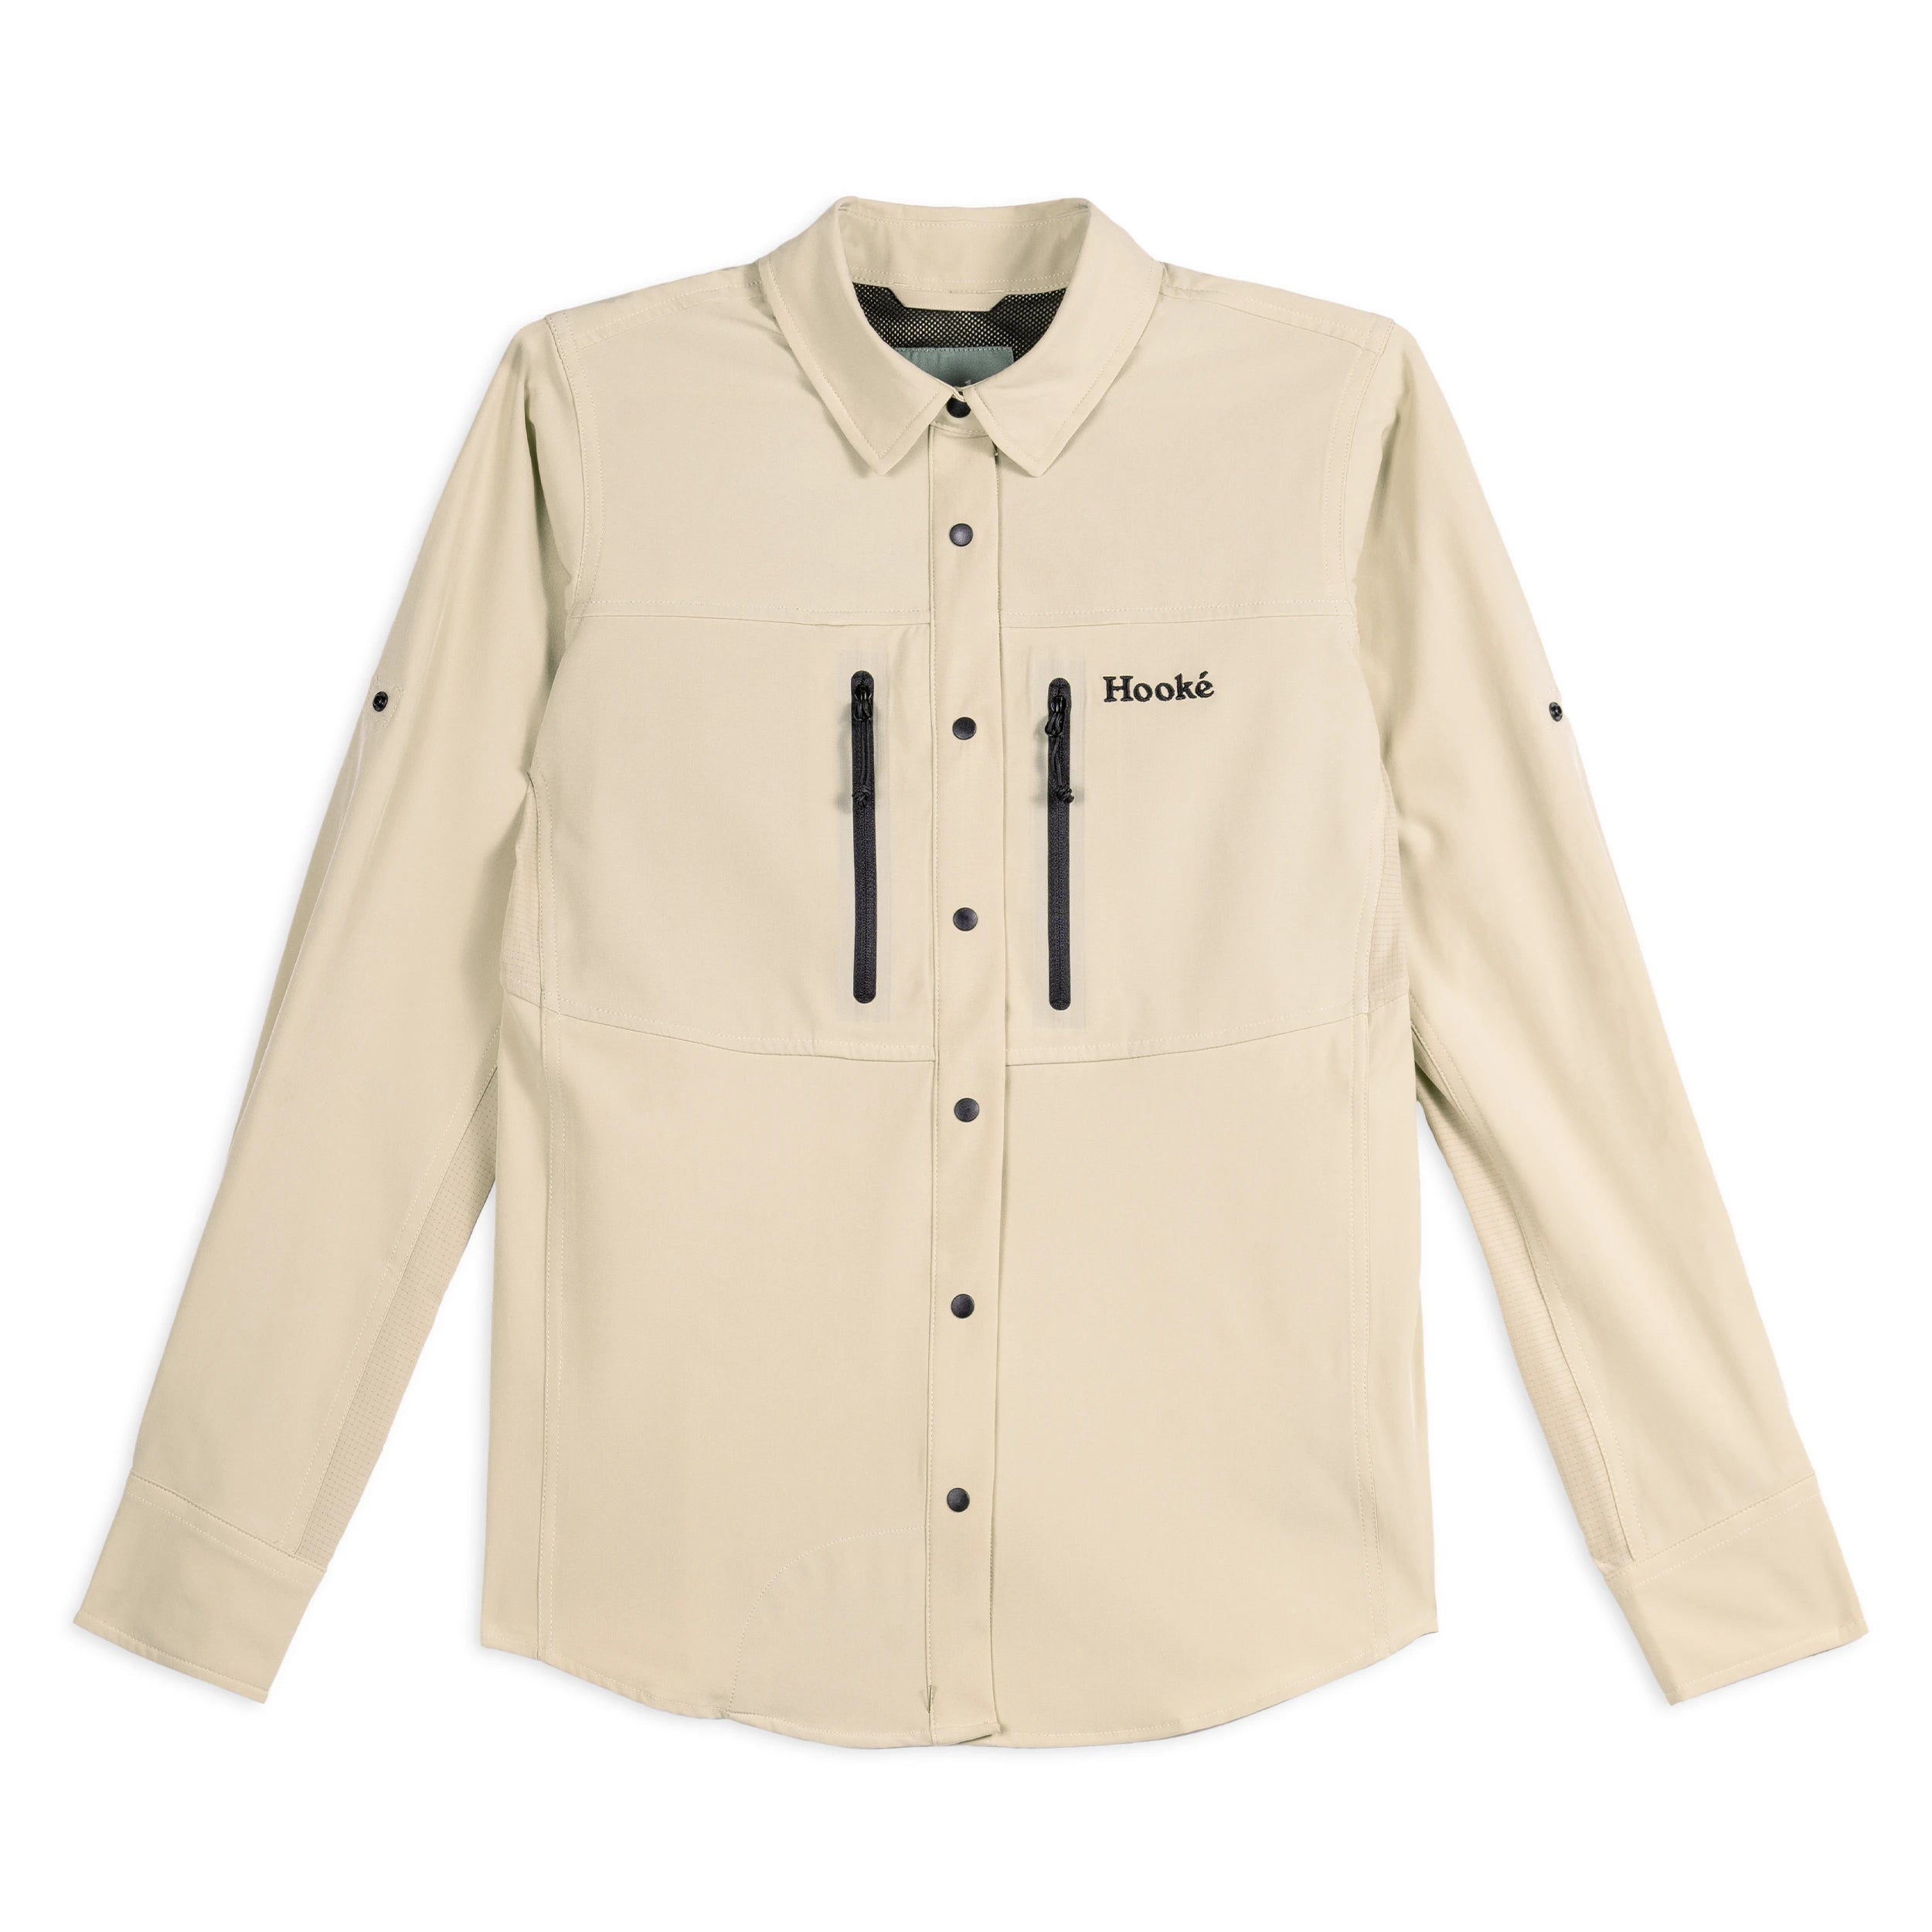 Fishing Shirt, Shop The Largest Collection